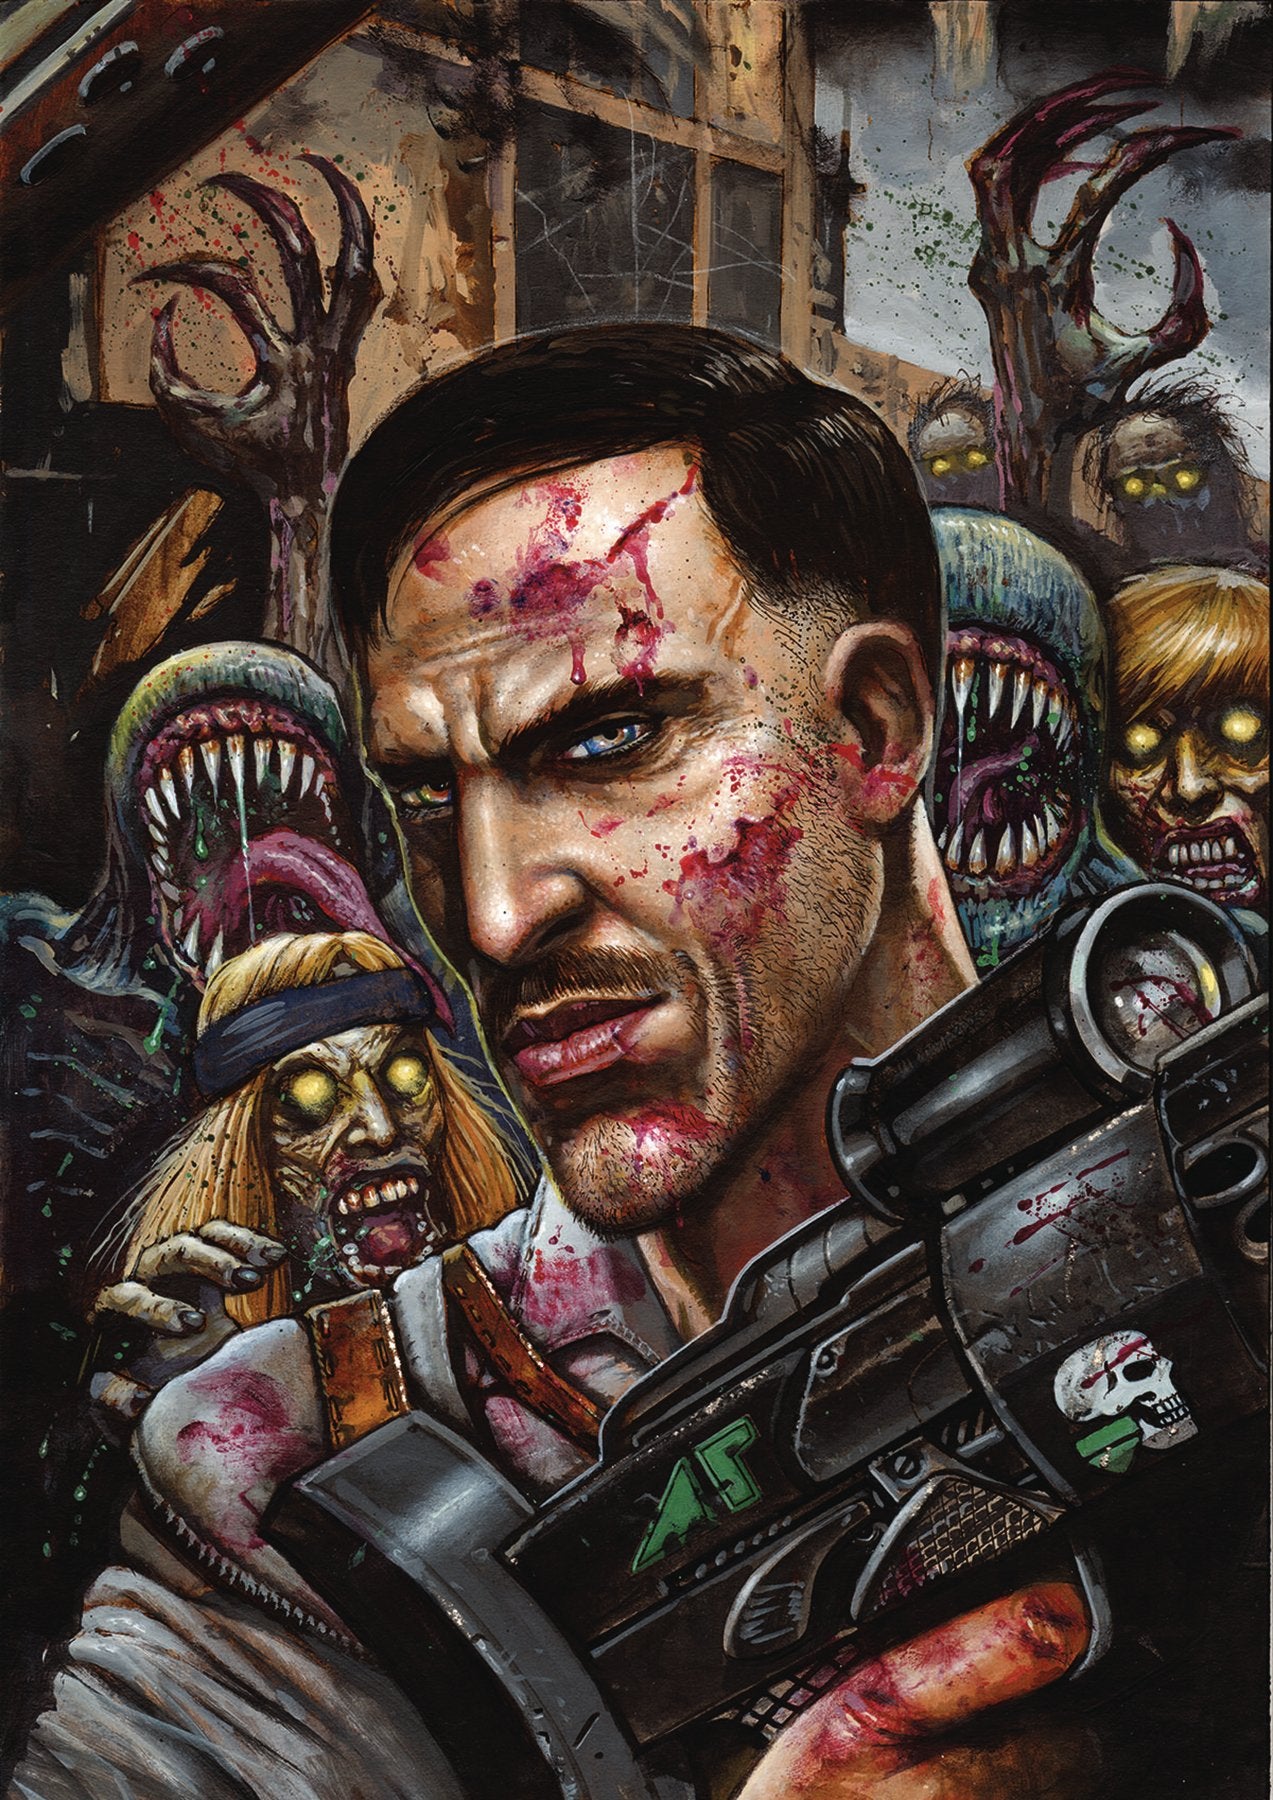 CALL OF DUTY ZOMBIES #6 COVER